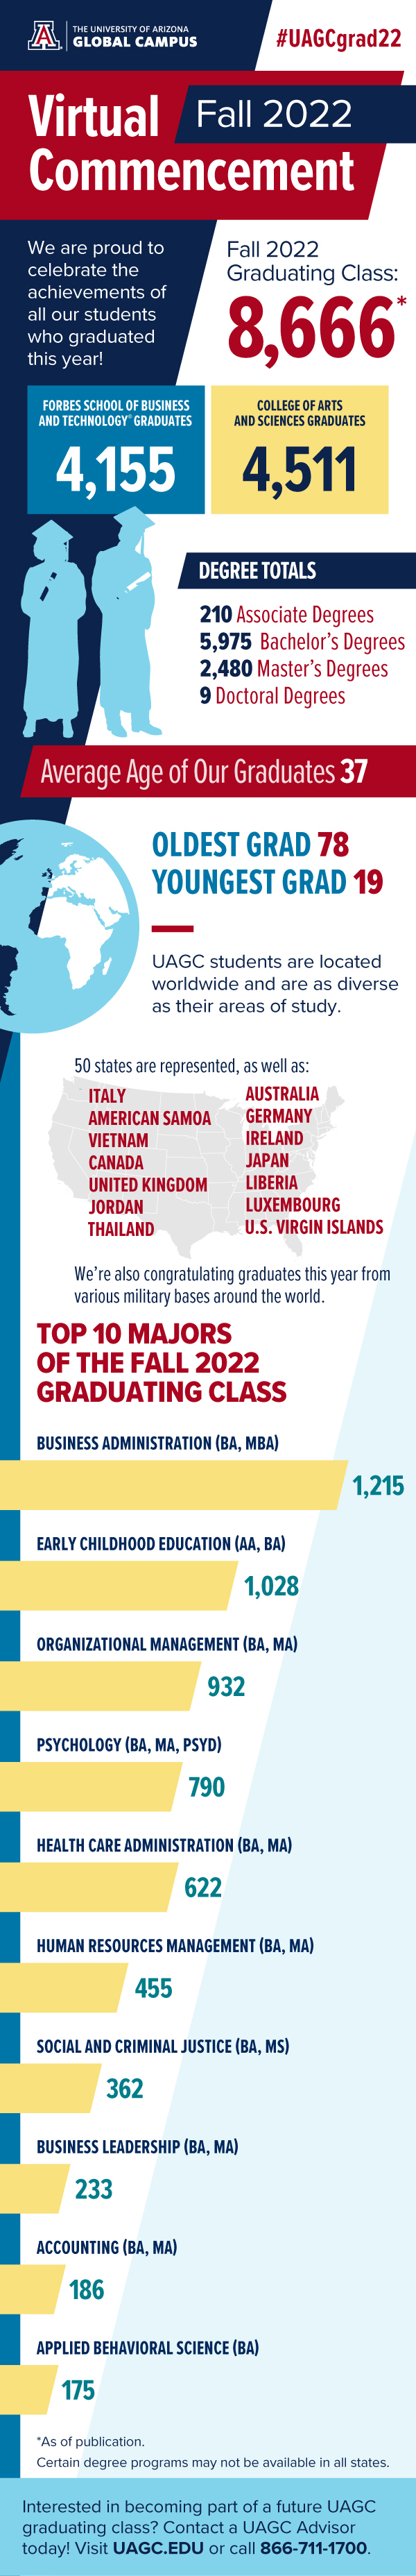 UAGC Fall 2022 Commencement by the Numbers